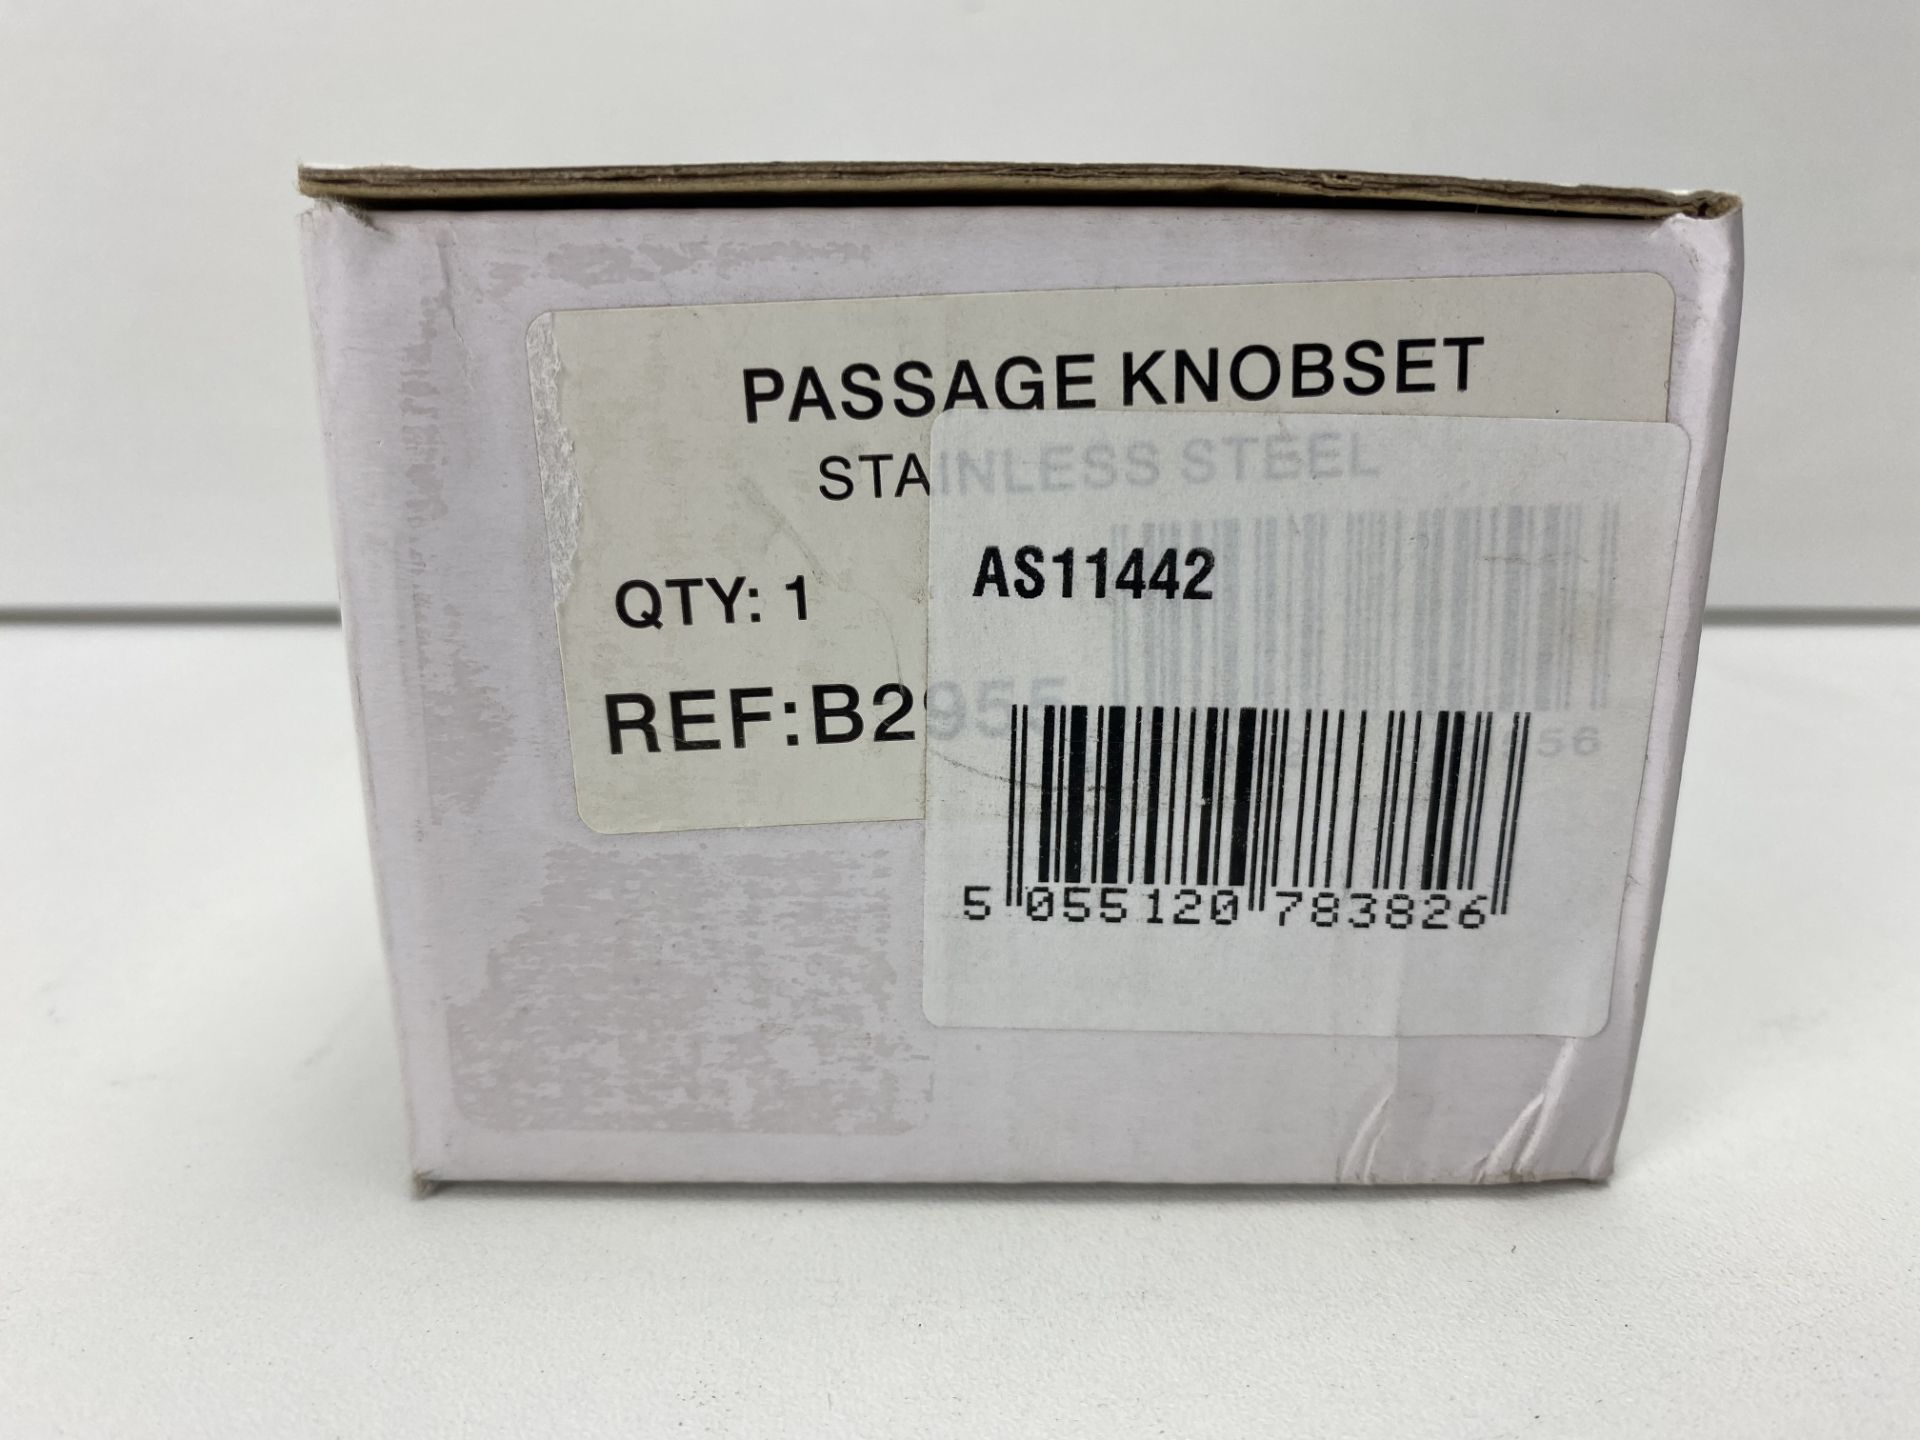 4 x ASEC Passage Knobset - Stainless Steel - Image 2 of 3